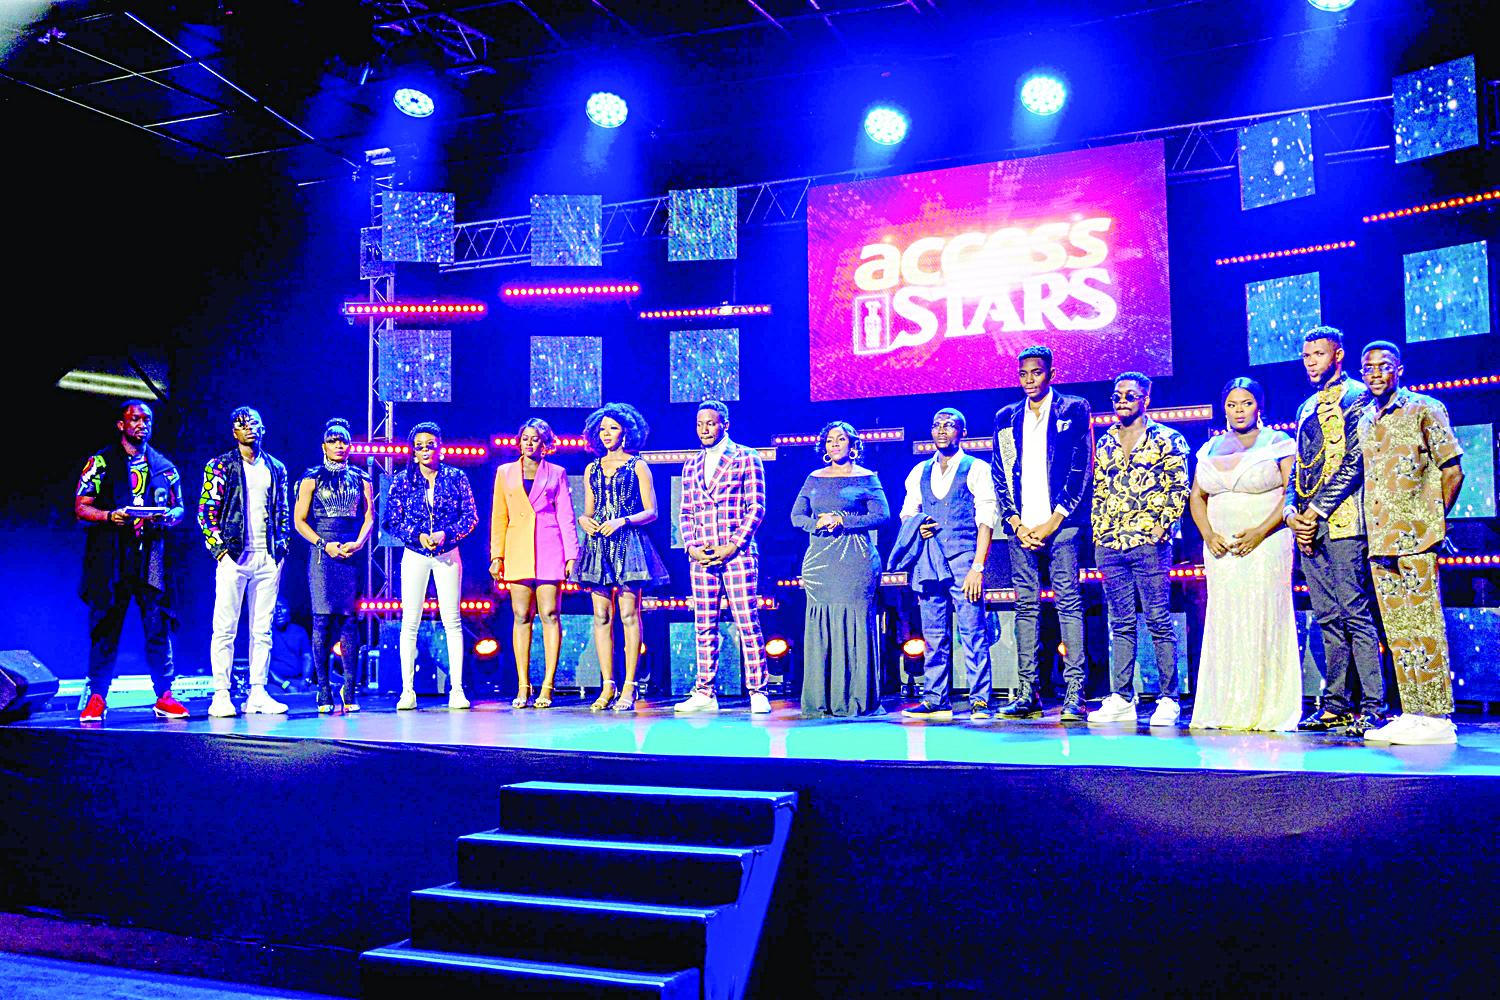 Access The Stars music reality TV show: Who wins N150 million star prize tonight?